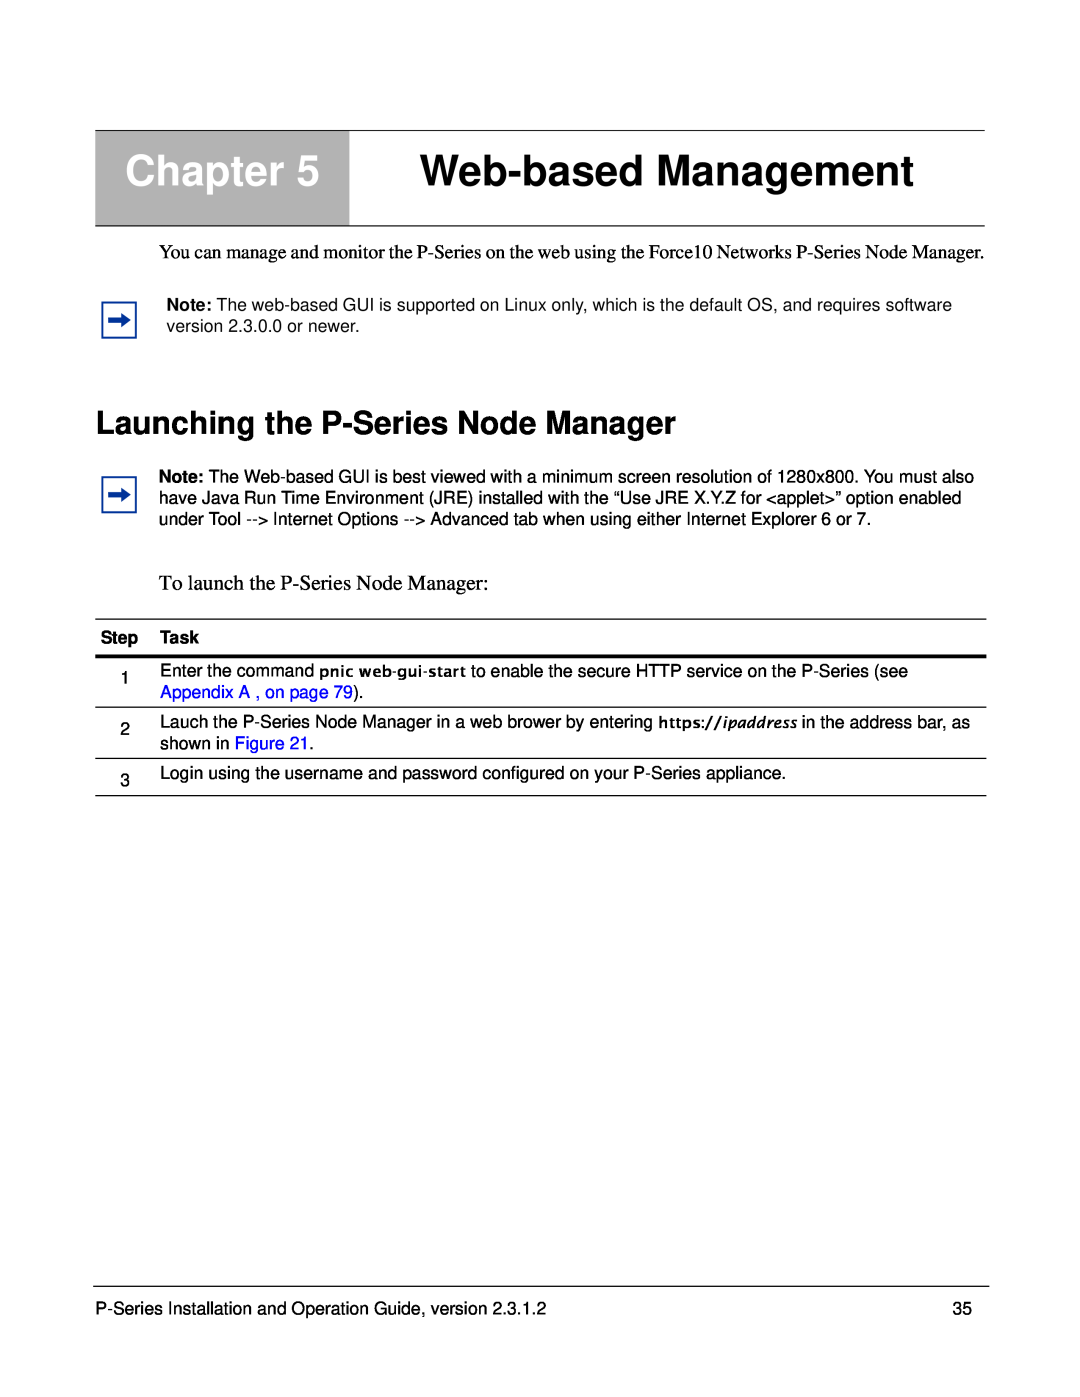 Force10 Networks 100-00055-01 manual Web-based Management, Launching the P-Series Node Manager 